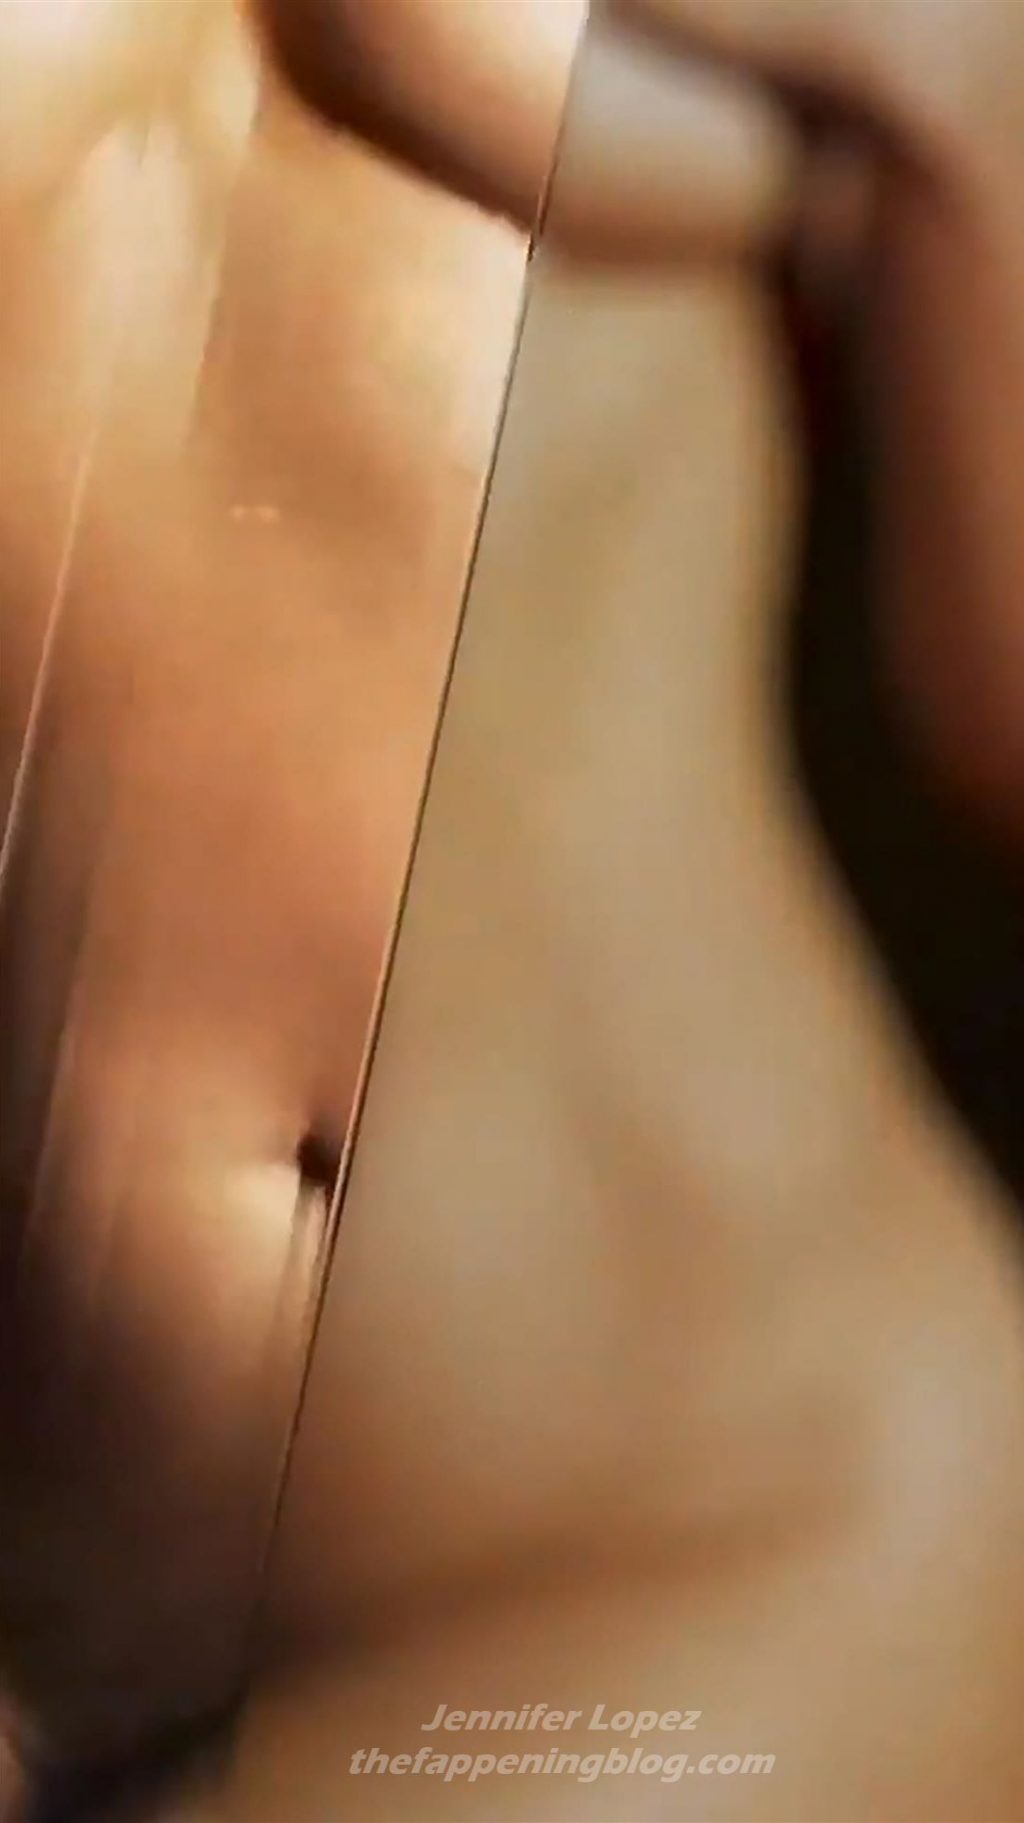 Jennifer Lopez is Naked in Her New Music Video Teaser (22 Pics + Video)